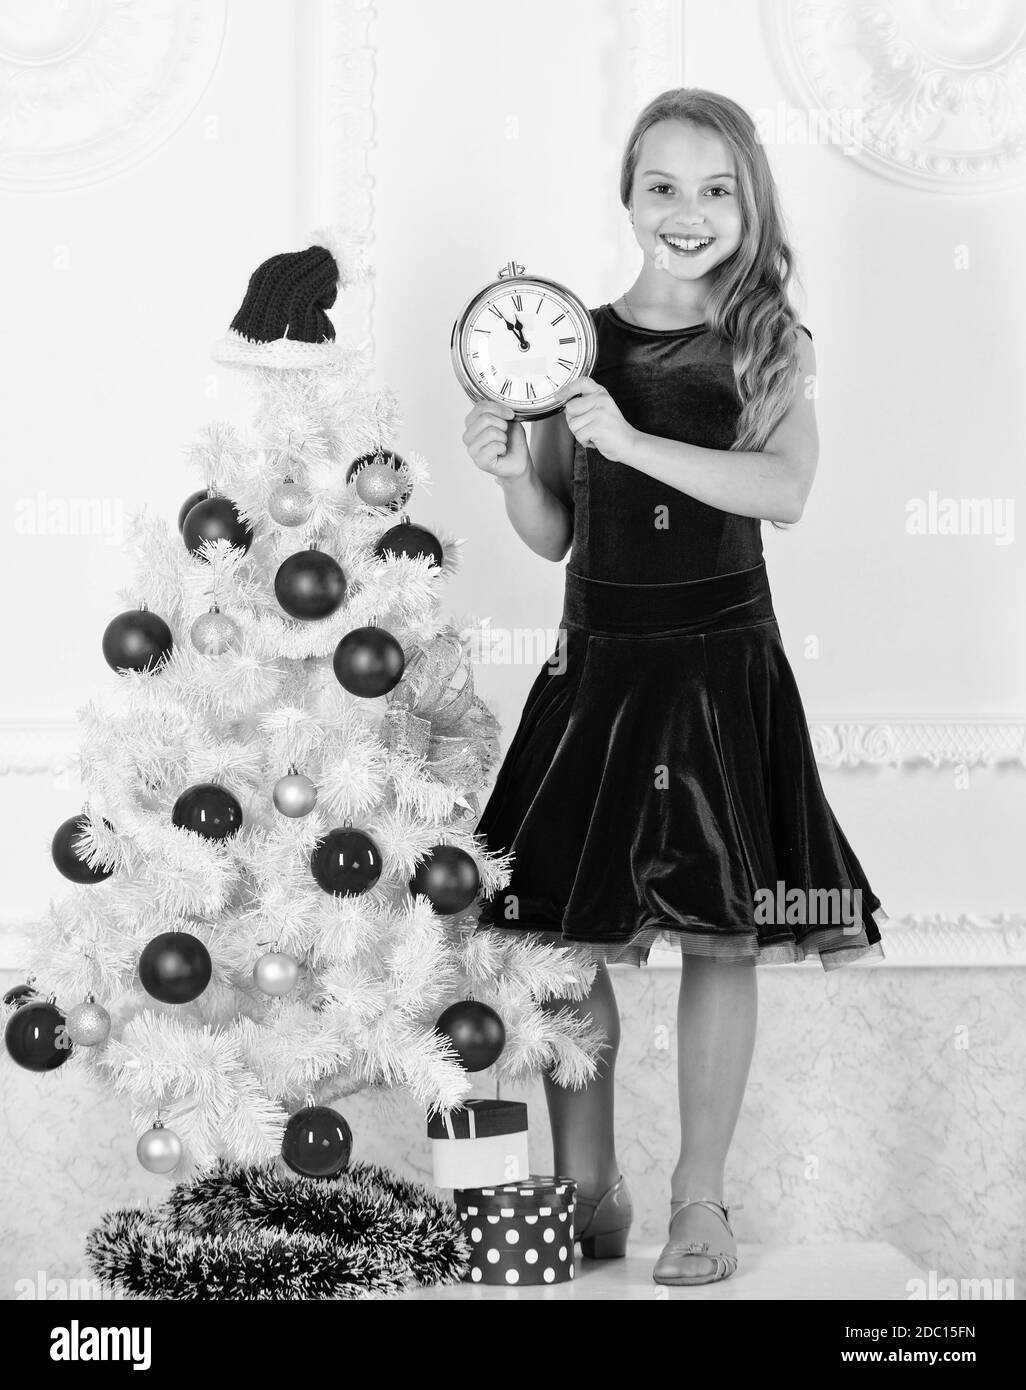 How much time left. Last minute till midnight. New year countdown. Last minute new years eve plans that are actually lot of fun. Girl kid santa hat costume with clock counting time to new year. Stock Photo